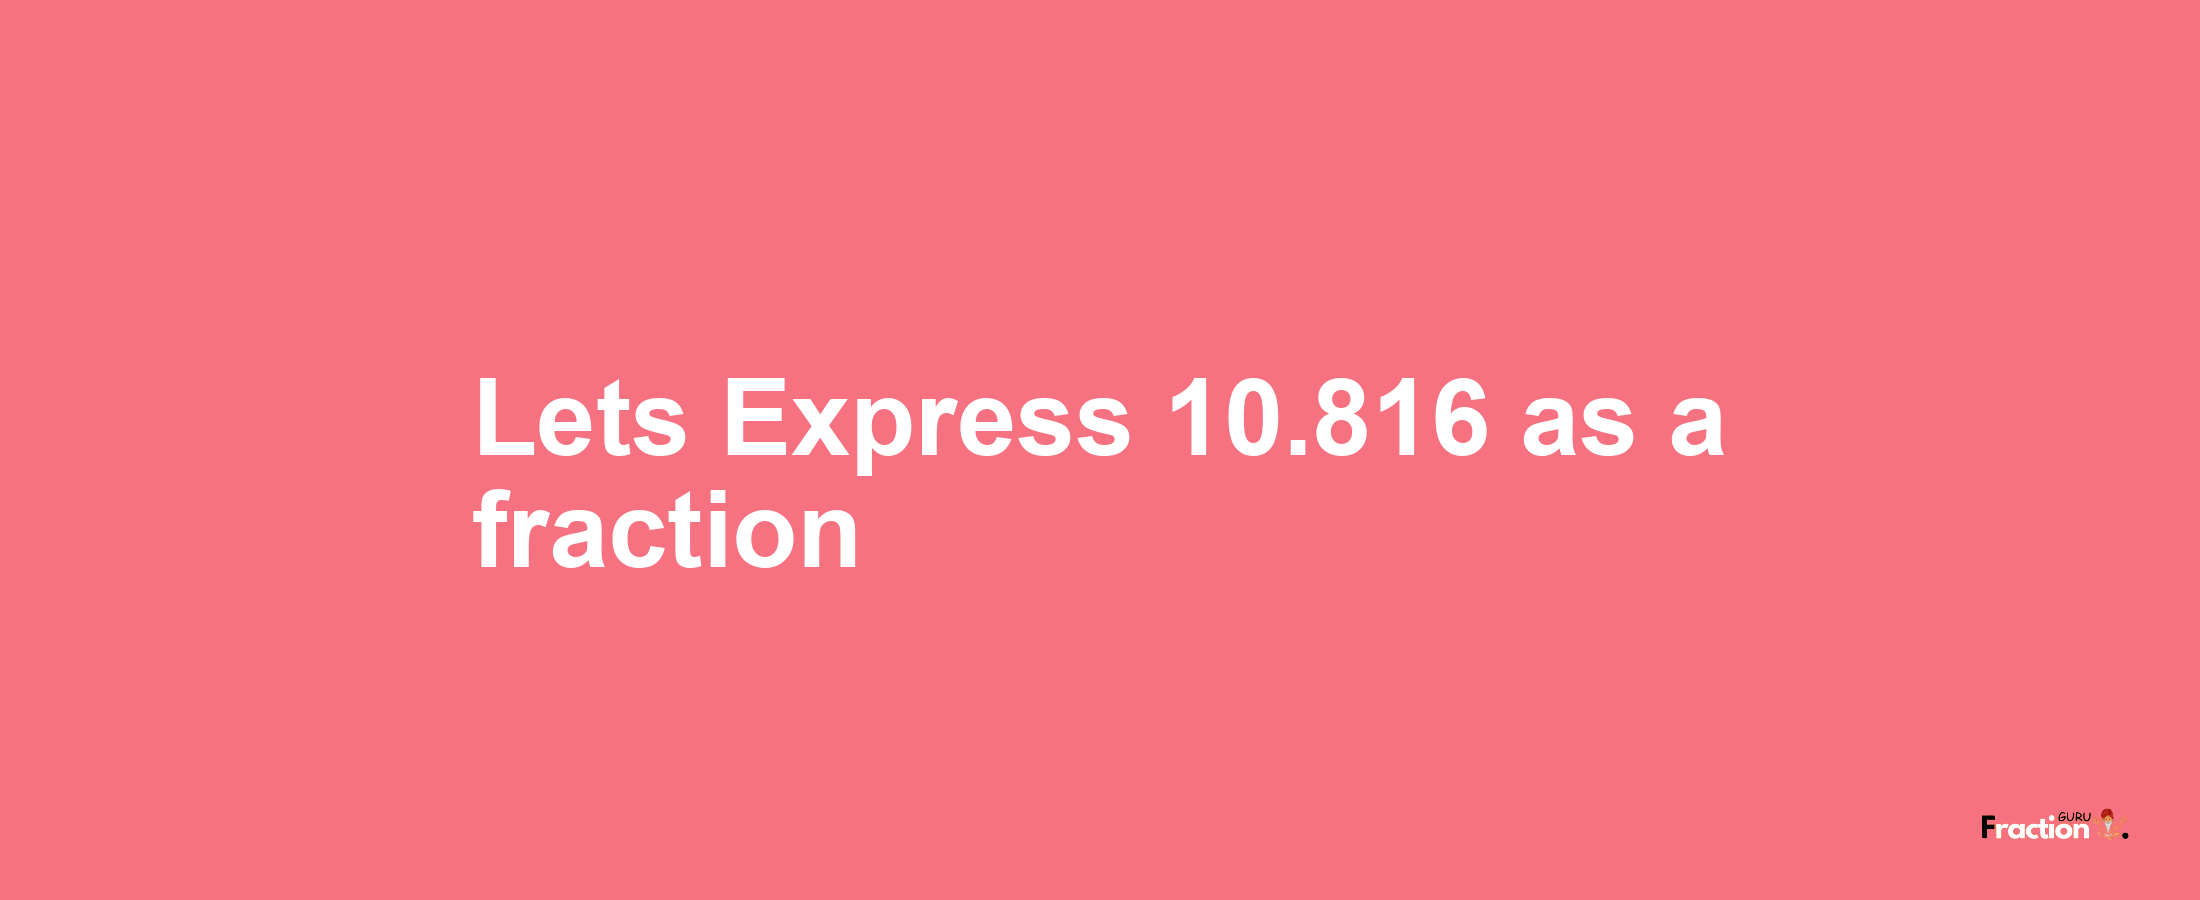 Lets Express 10.816 as afraction